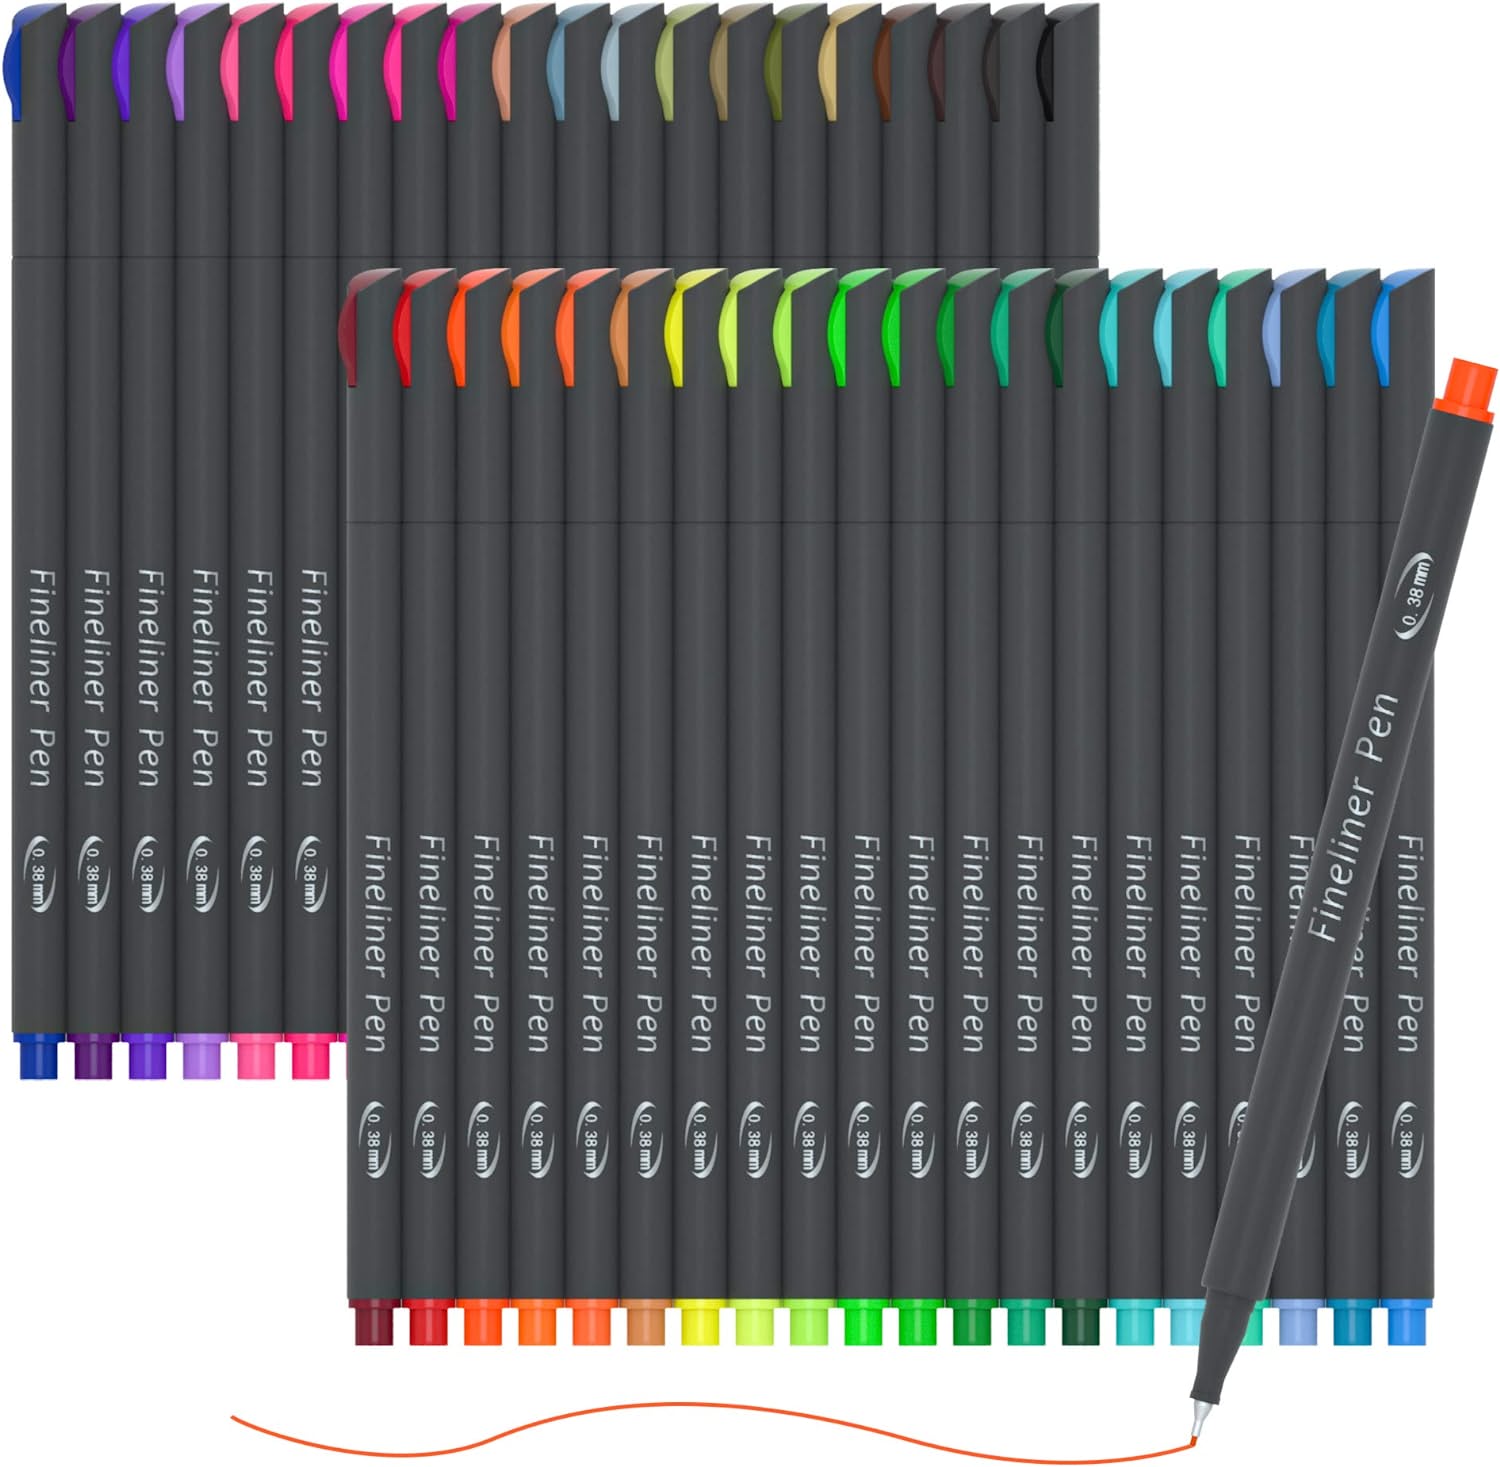 Up To 49% Off on iBayam Journal Planner Pens C